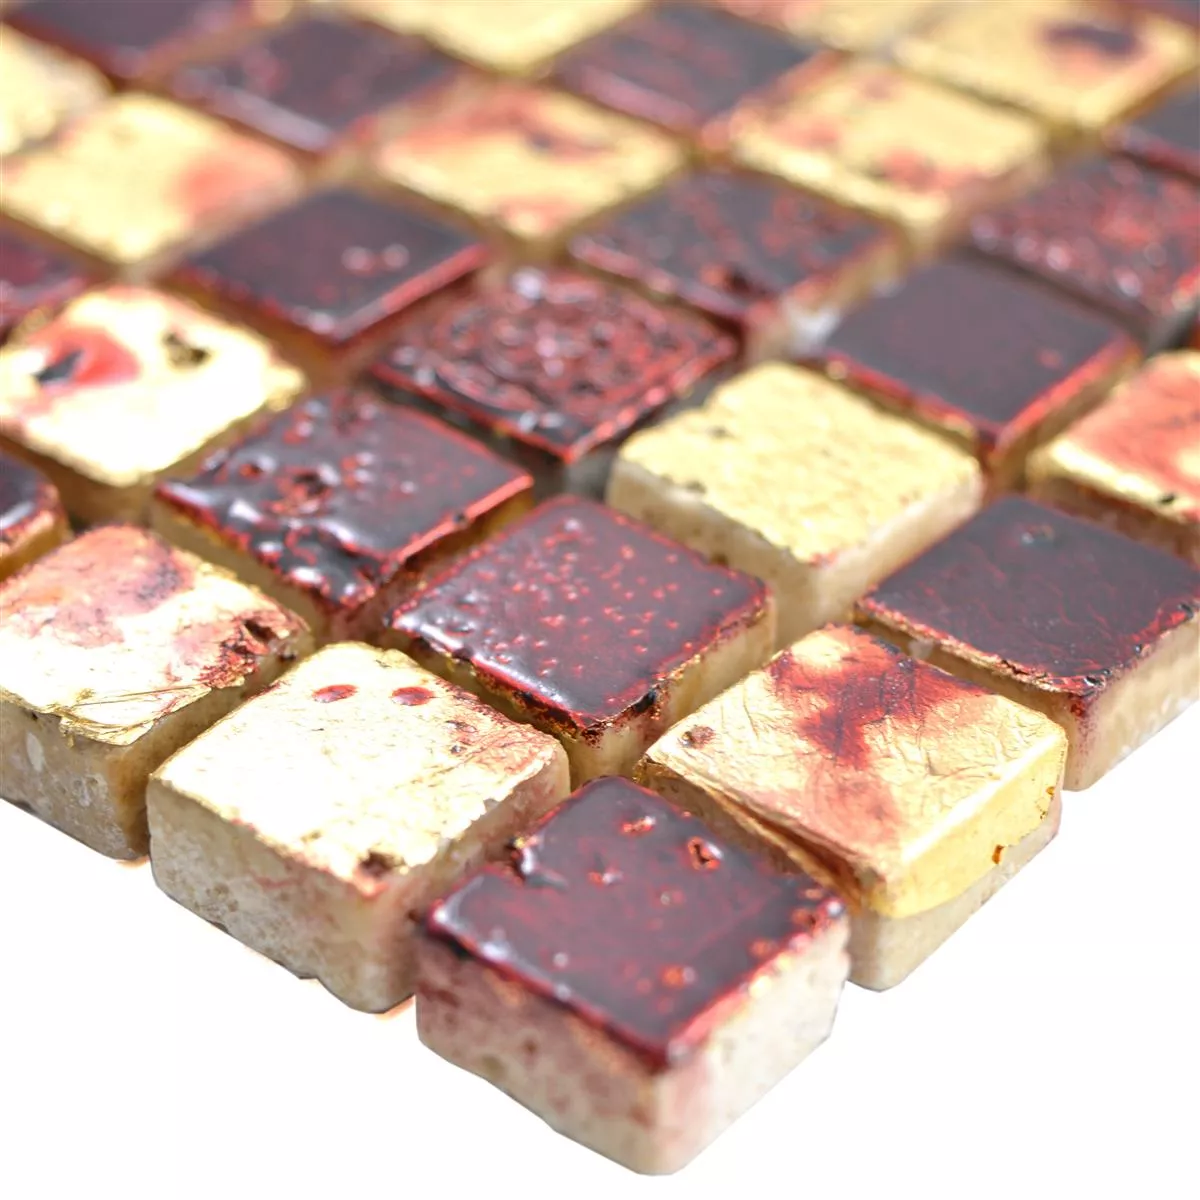 Sample Natural Stone Resin Mosaic Tiles Lucky Gold Red